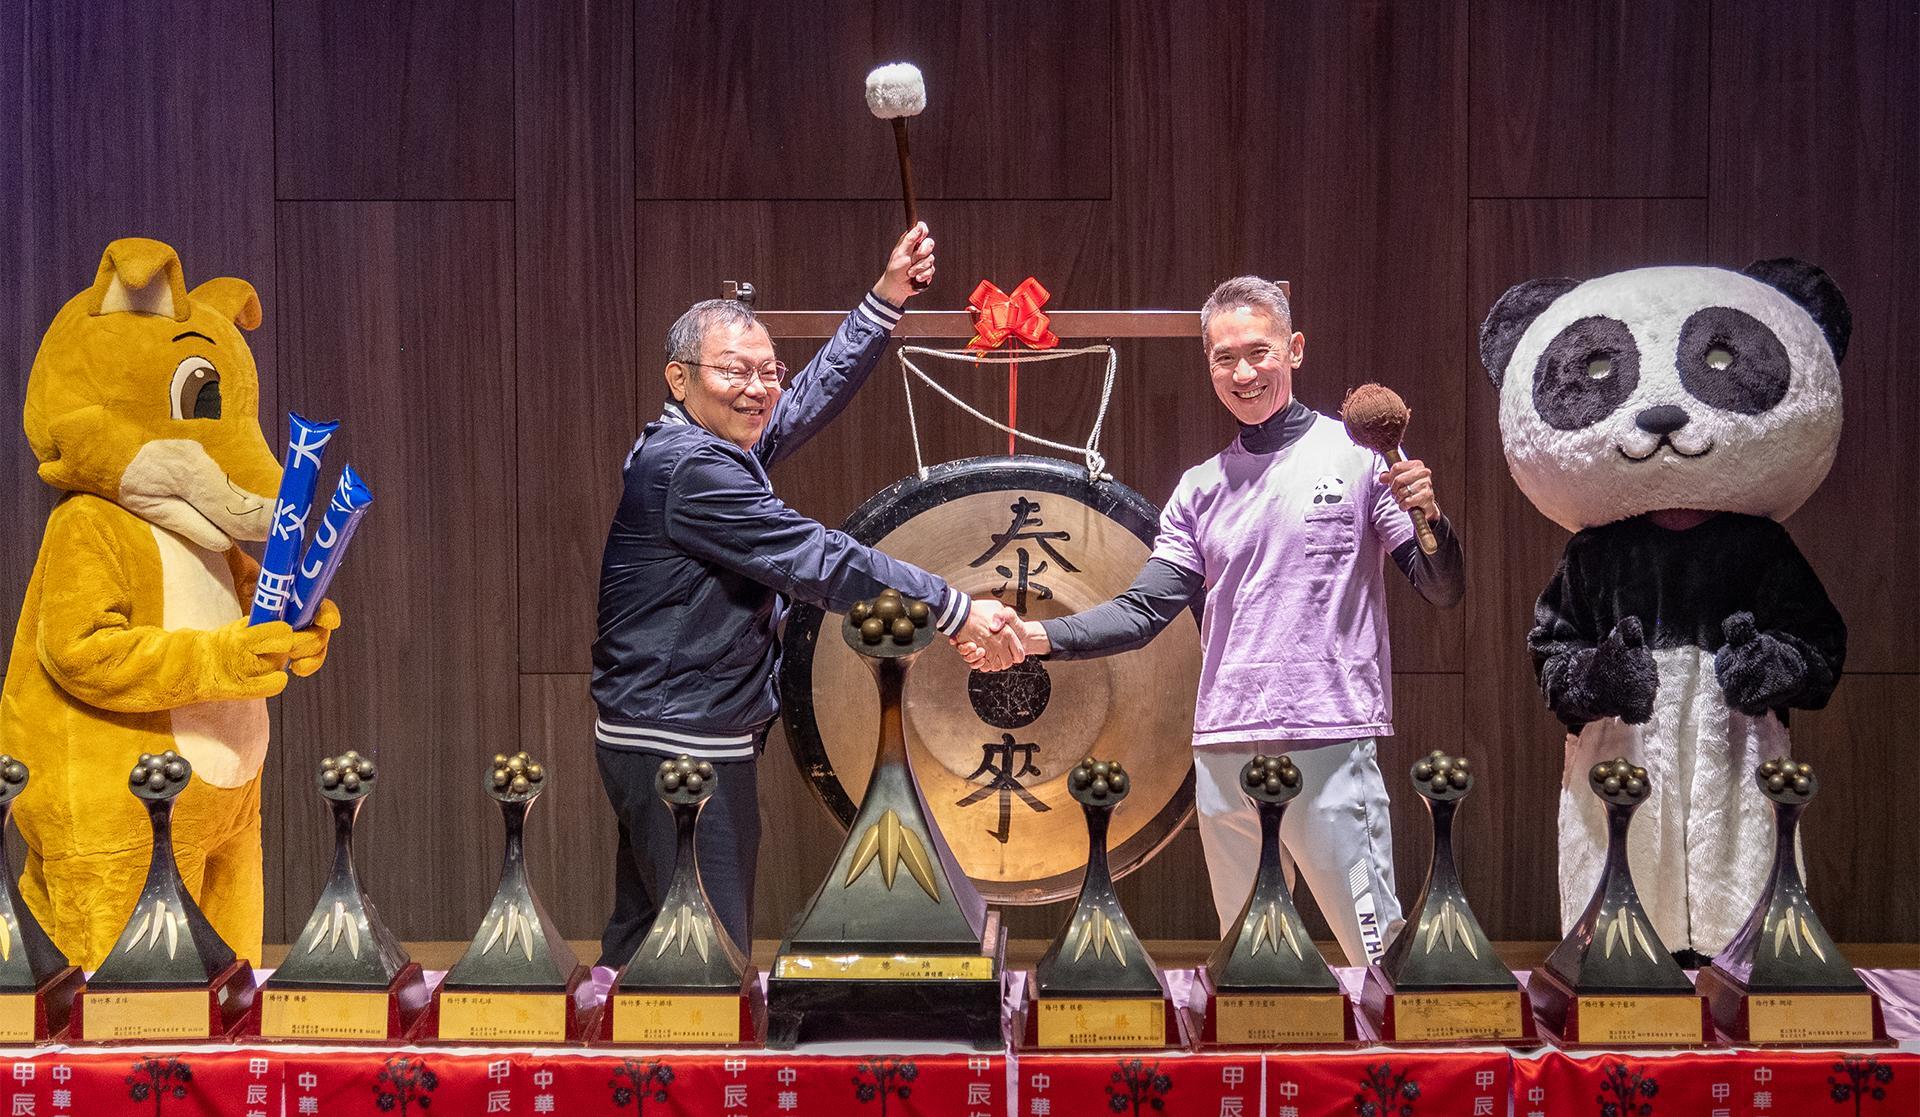 Presidents W. John Kao (高為元) of NTHU and Chi-Hung Lin (林奇宏) of NYCU struck the gong together to inaugurate the three-day Meichu Games.